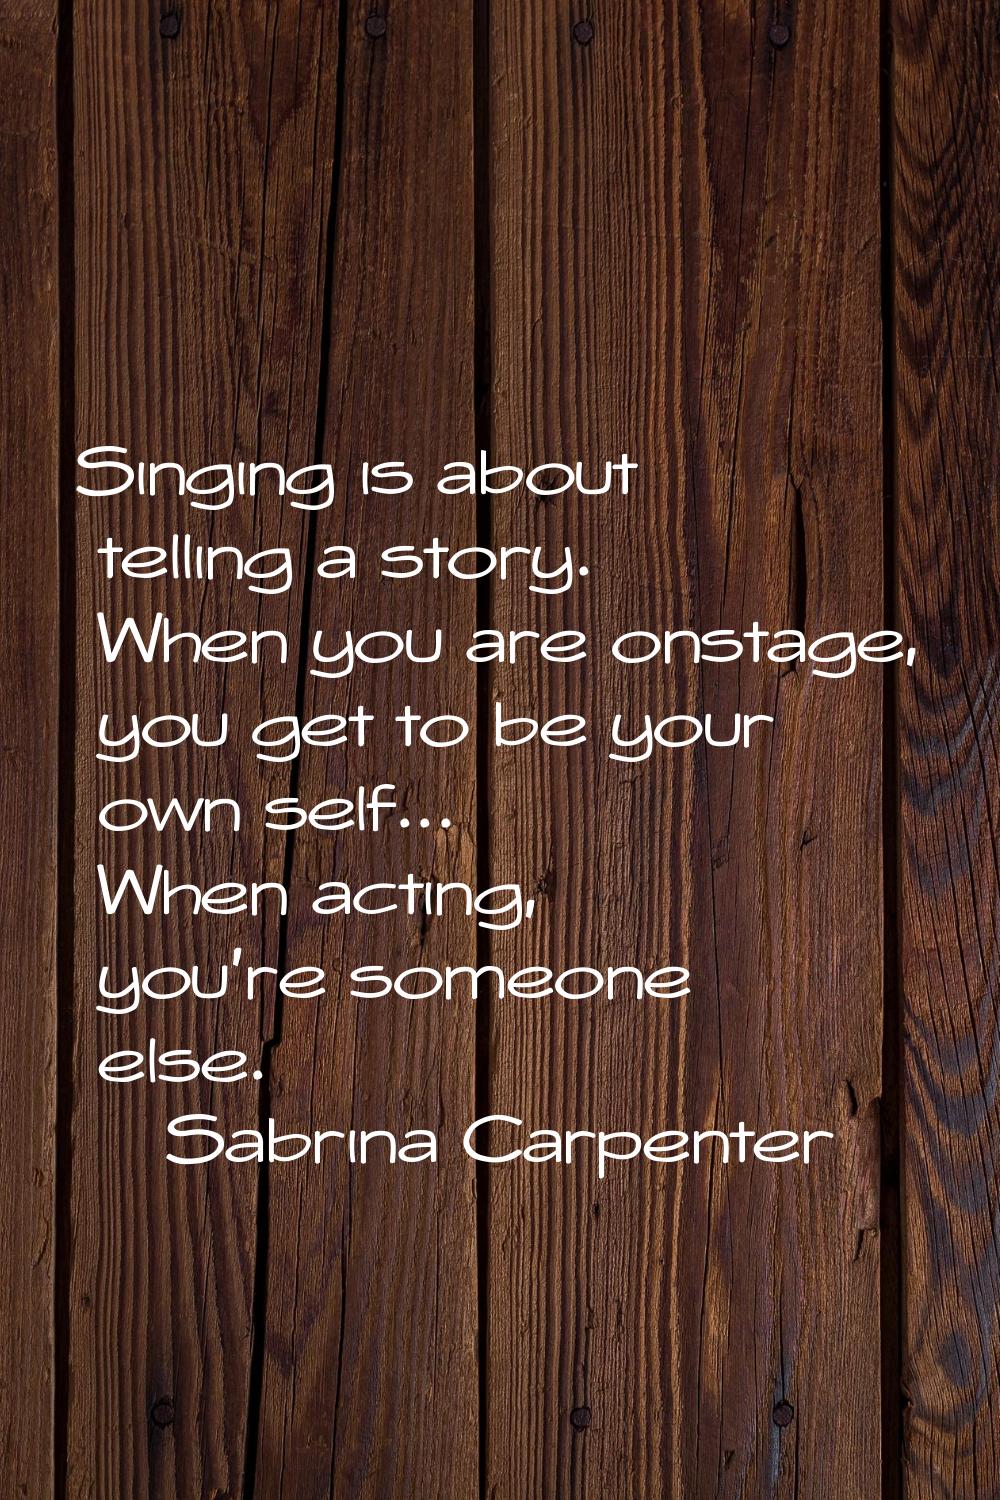 Singing is about telling a story. When you are onstage, you get to be your own self... When acting,